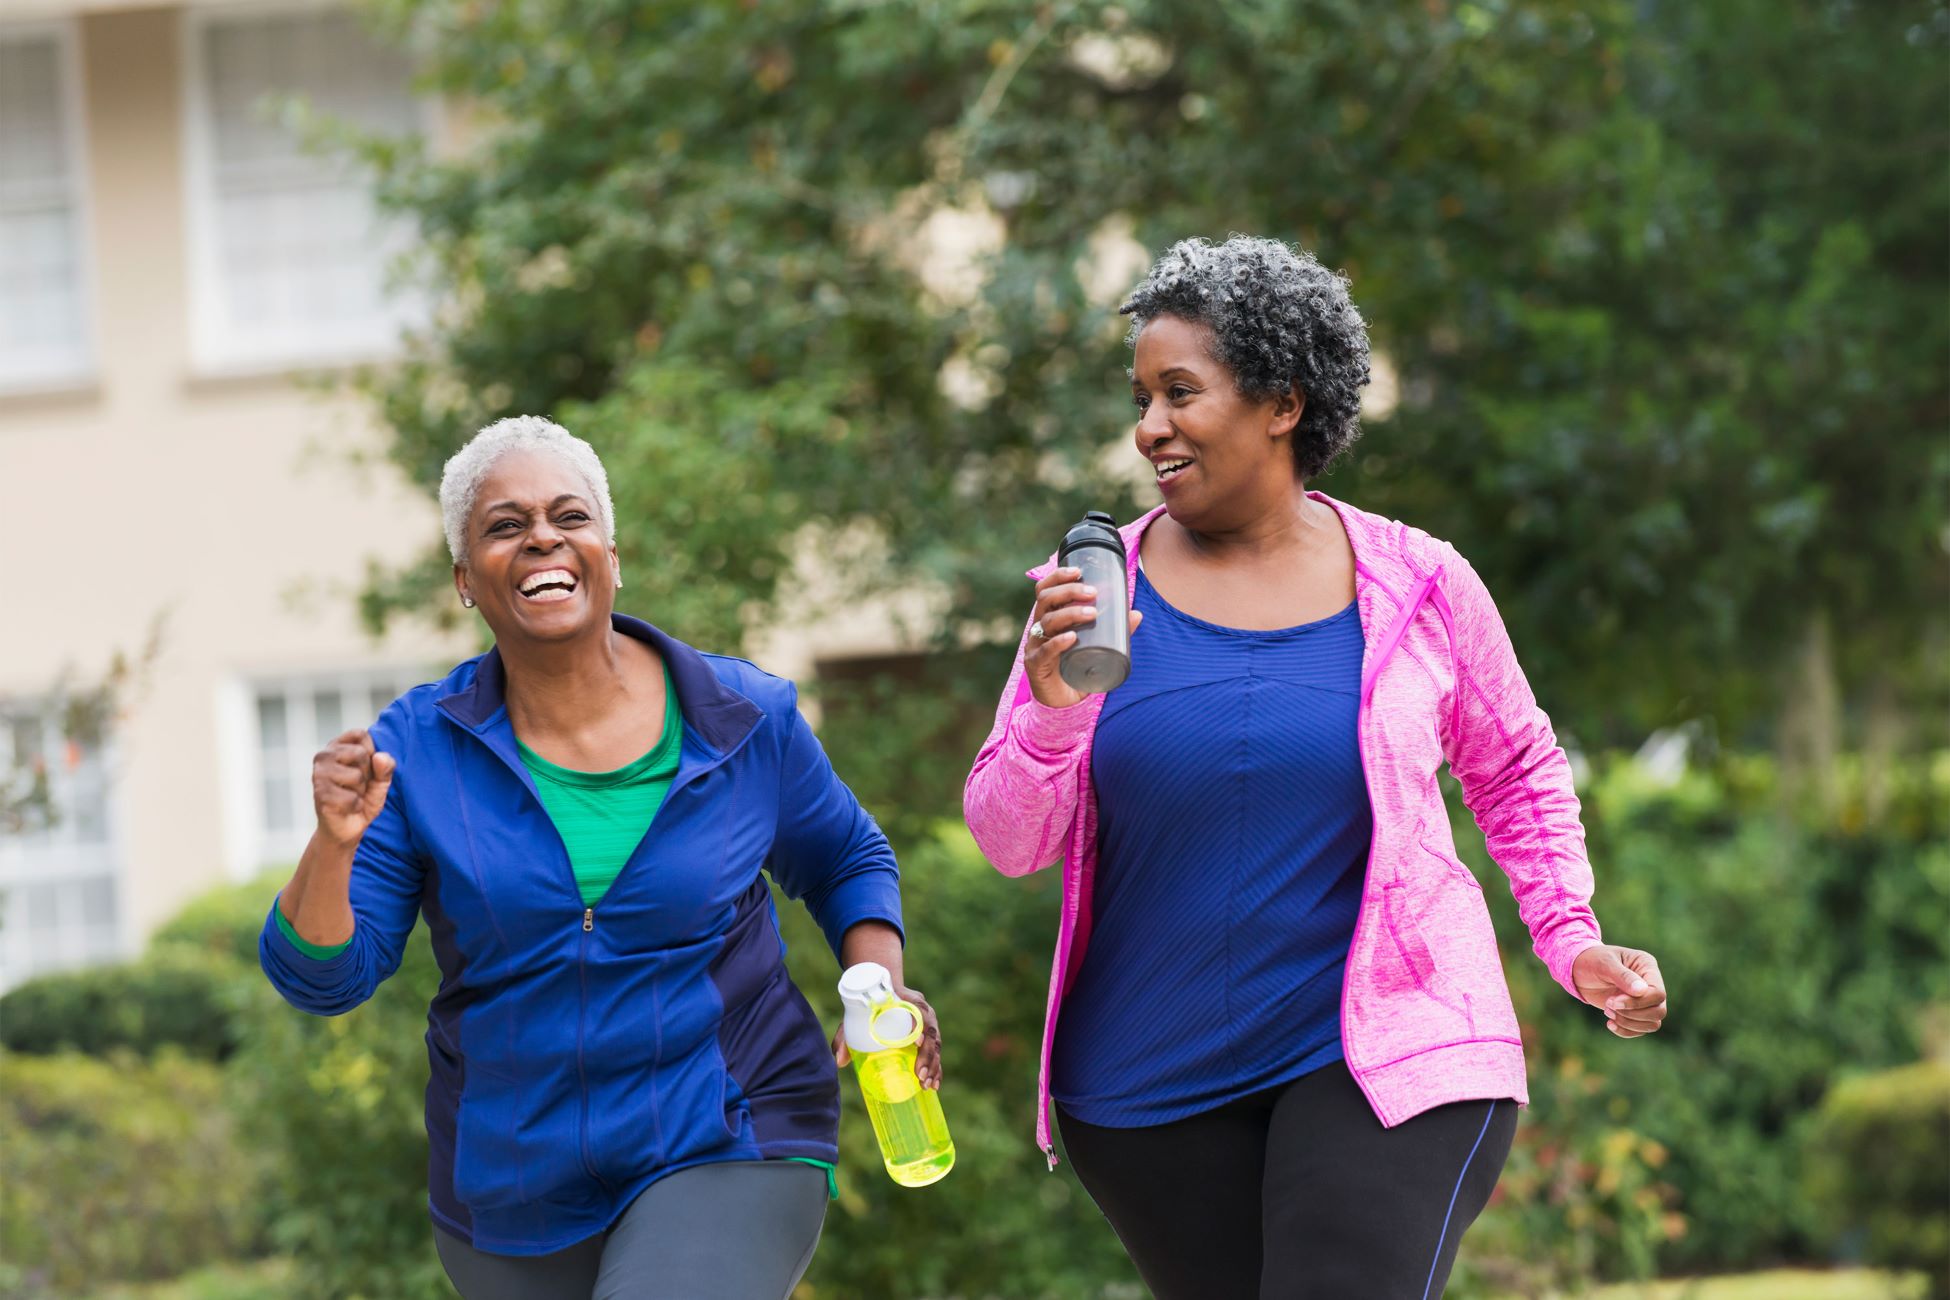 Can Running Effectively Lower Your Cholesterol Levels?